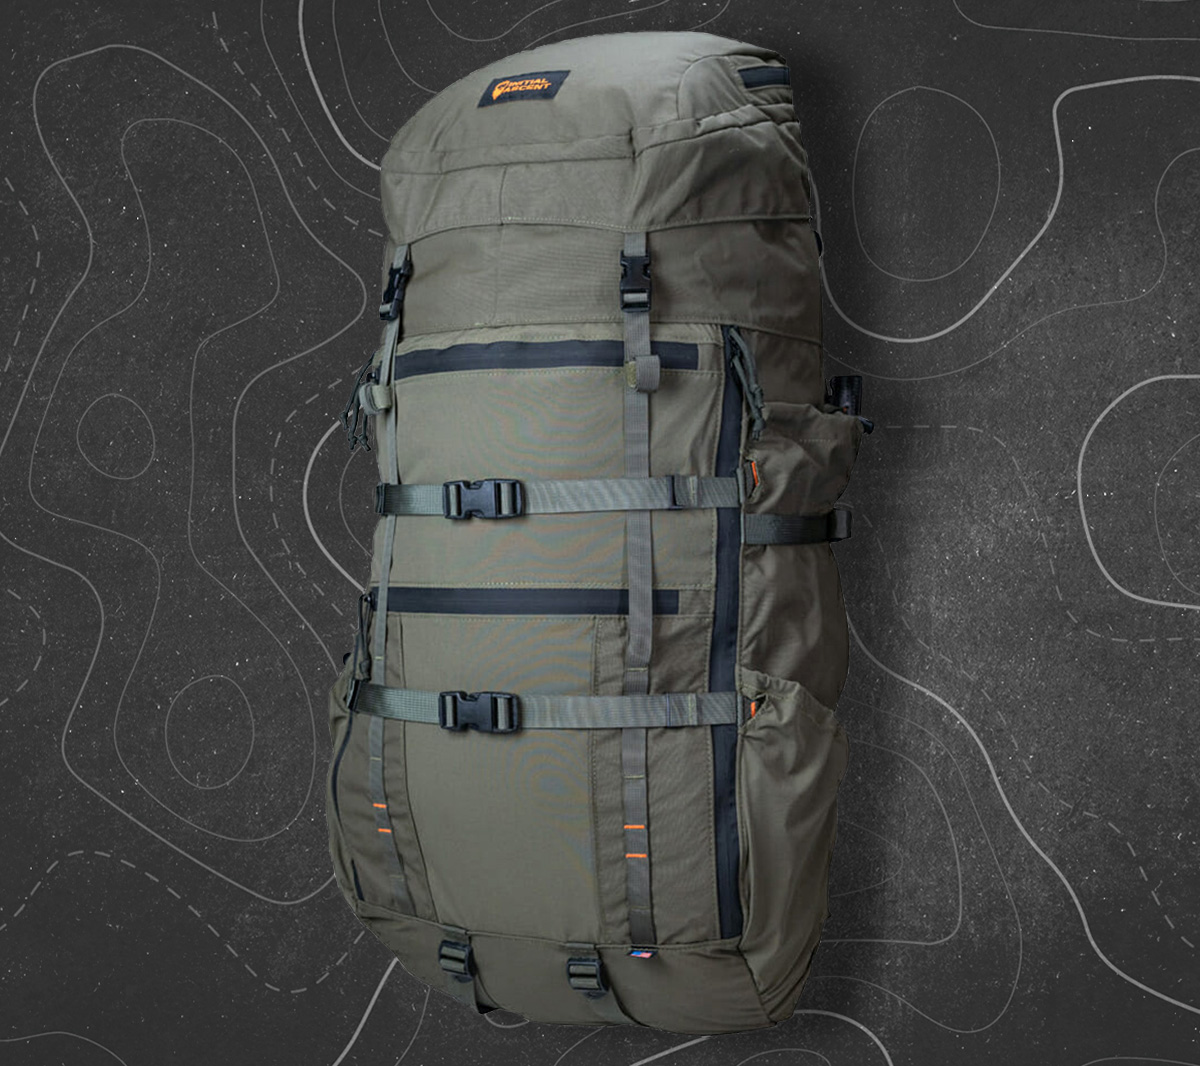 Initial Ascent kicked ass with the IA6K pack system. It’ll carry your house, your gear, and all of your hard-earned meat.